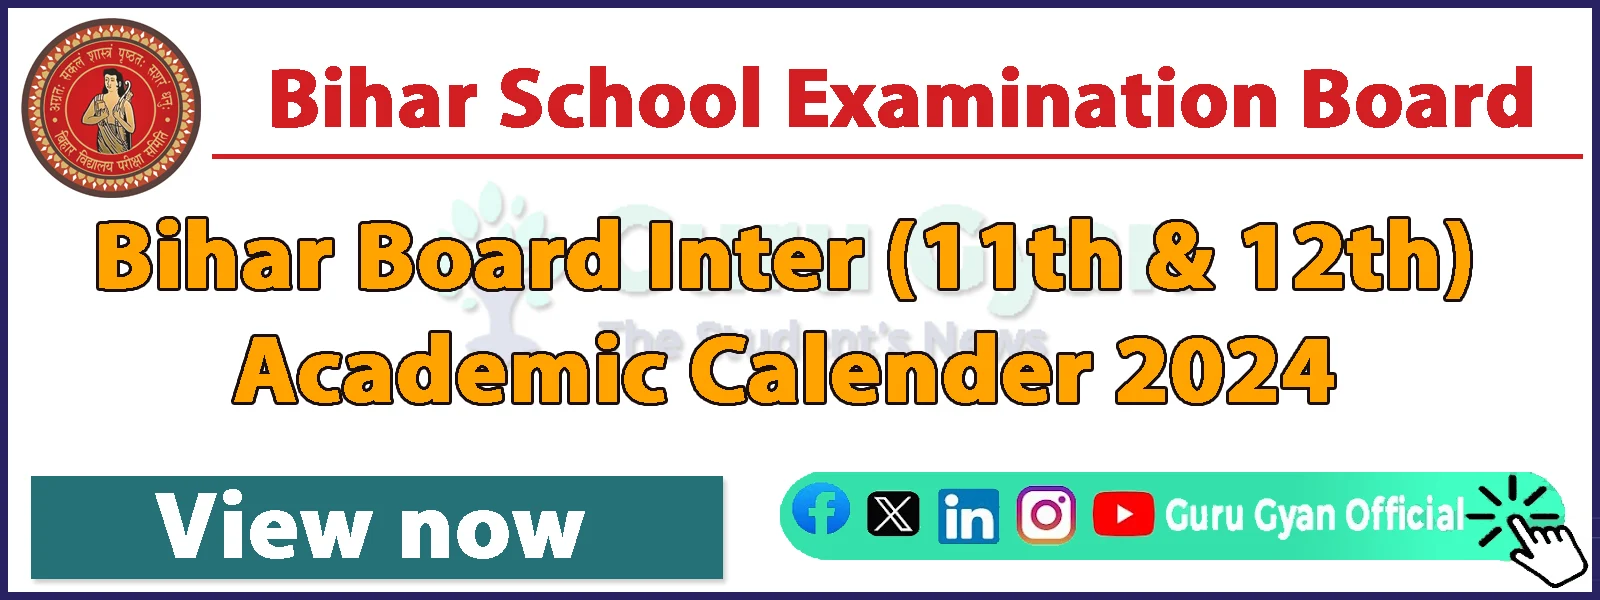 BSEB Inter (11th & 12th) Academic Calender 2024